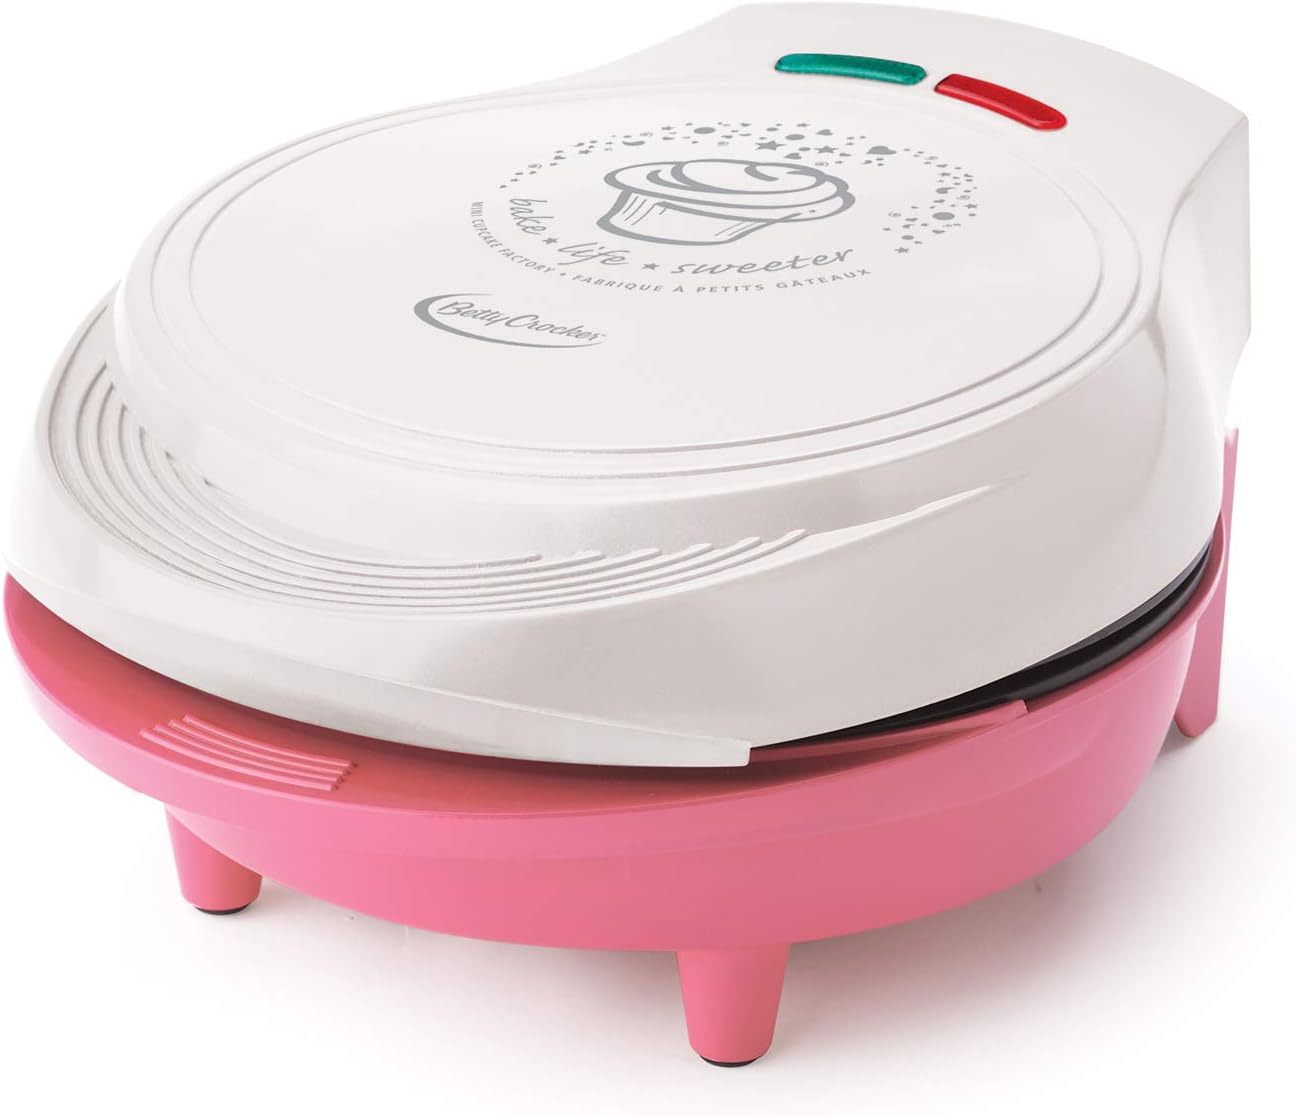 I was looking for an alternative gift for my nieces vs. the Easy Bake Oven which is now priced at $150 (INSANE). This was a great choice & simple to use (just plug in, no settings). Also easy to clean (no spray needed), but definitely needs monitoring with kid use due to HI temp. Our mini cupcakes were done in 5-6 mins & tasted great. My nieces enjoyed decorating too!